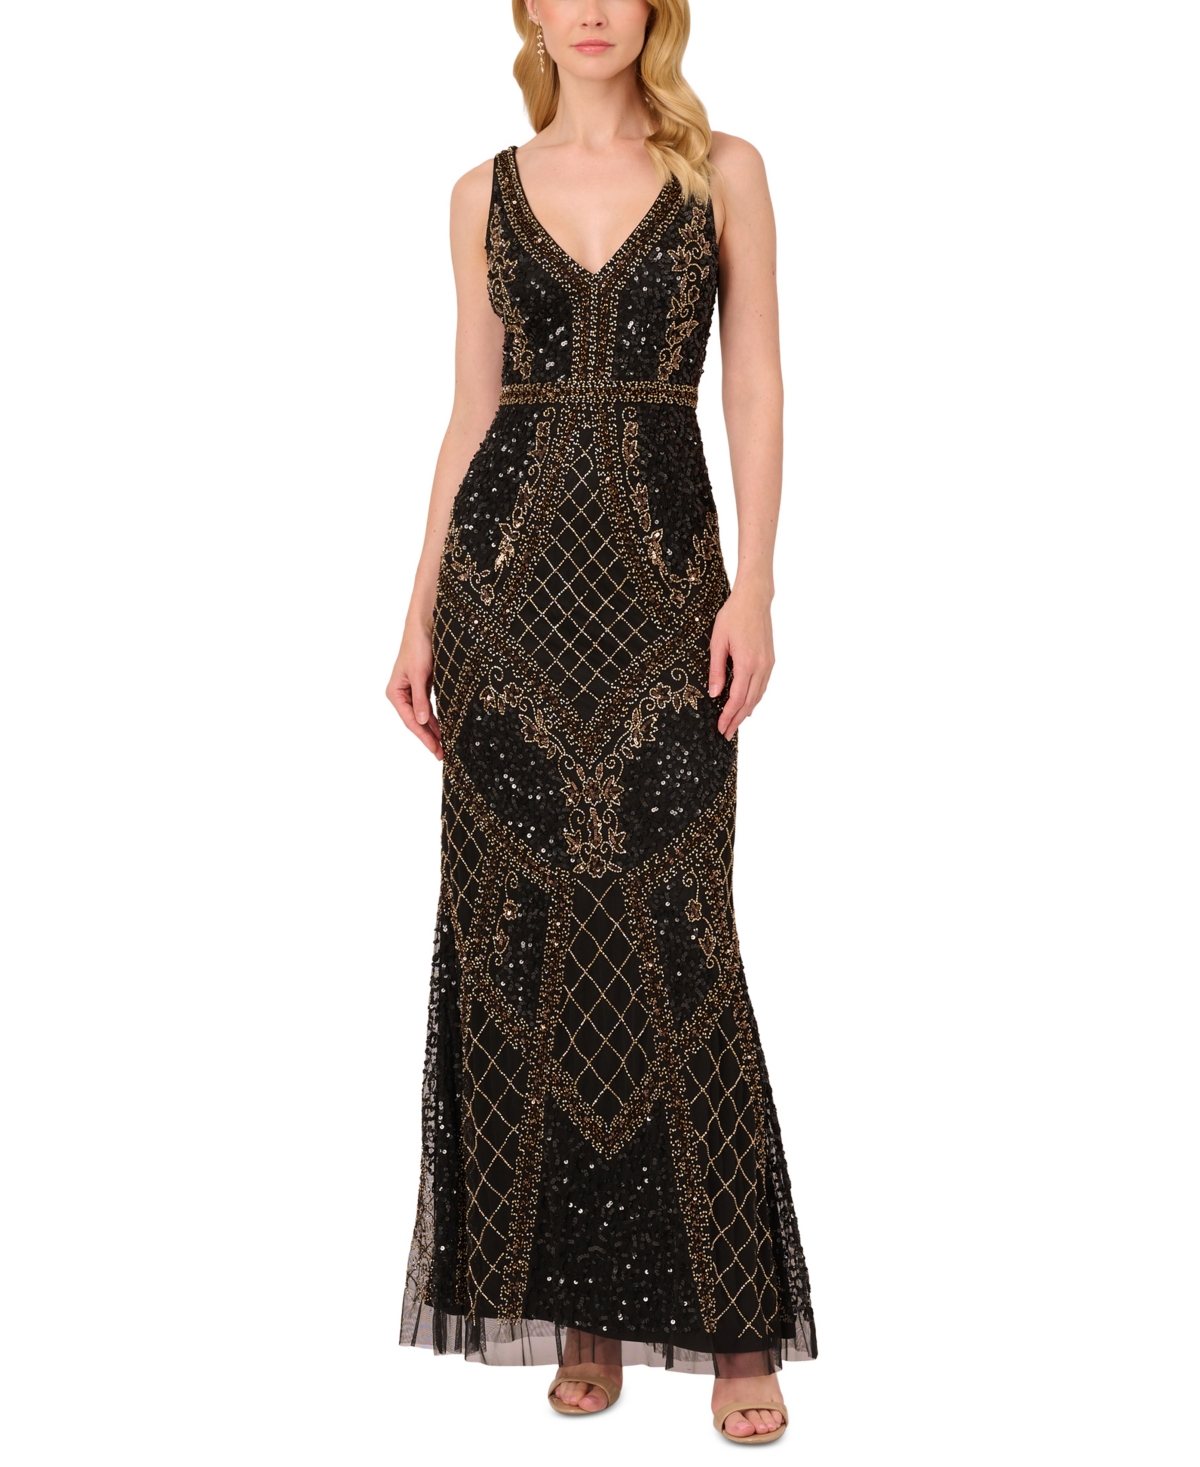 1920s Style Dresses, 1920s Dress Fashions You Will Love Adrianna Papell Womens Beaded Mesh Column Gown - Black Gold $349.00 AT vintagedancer.com